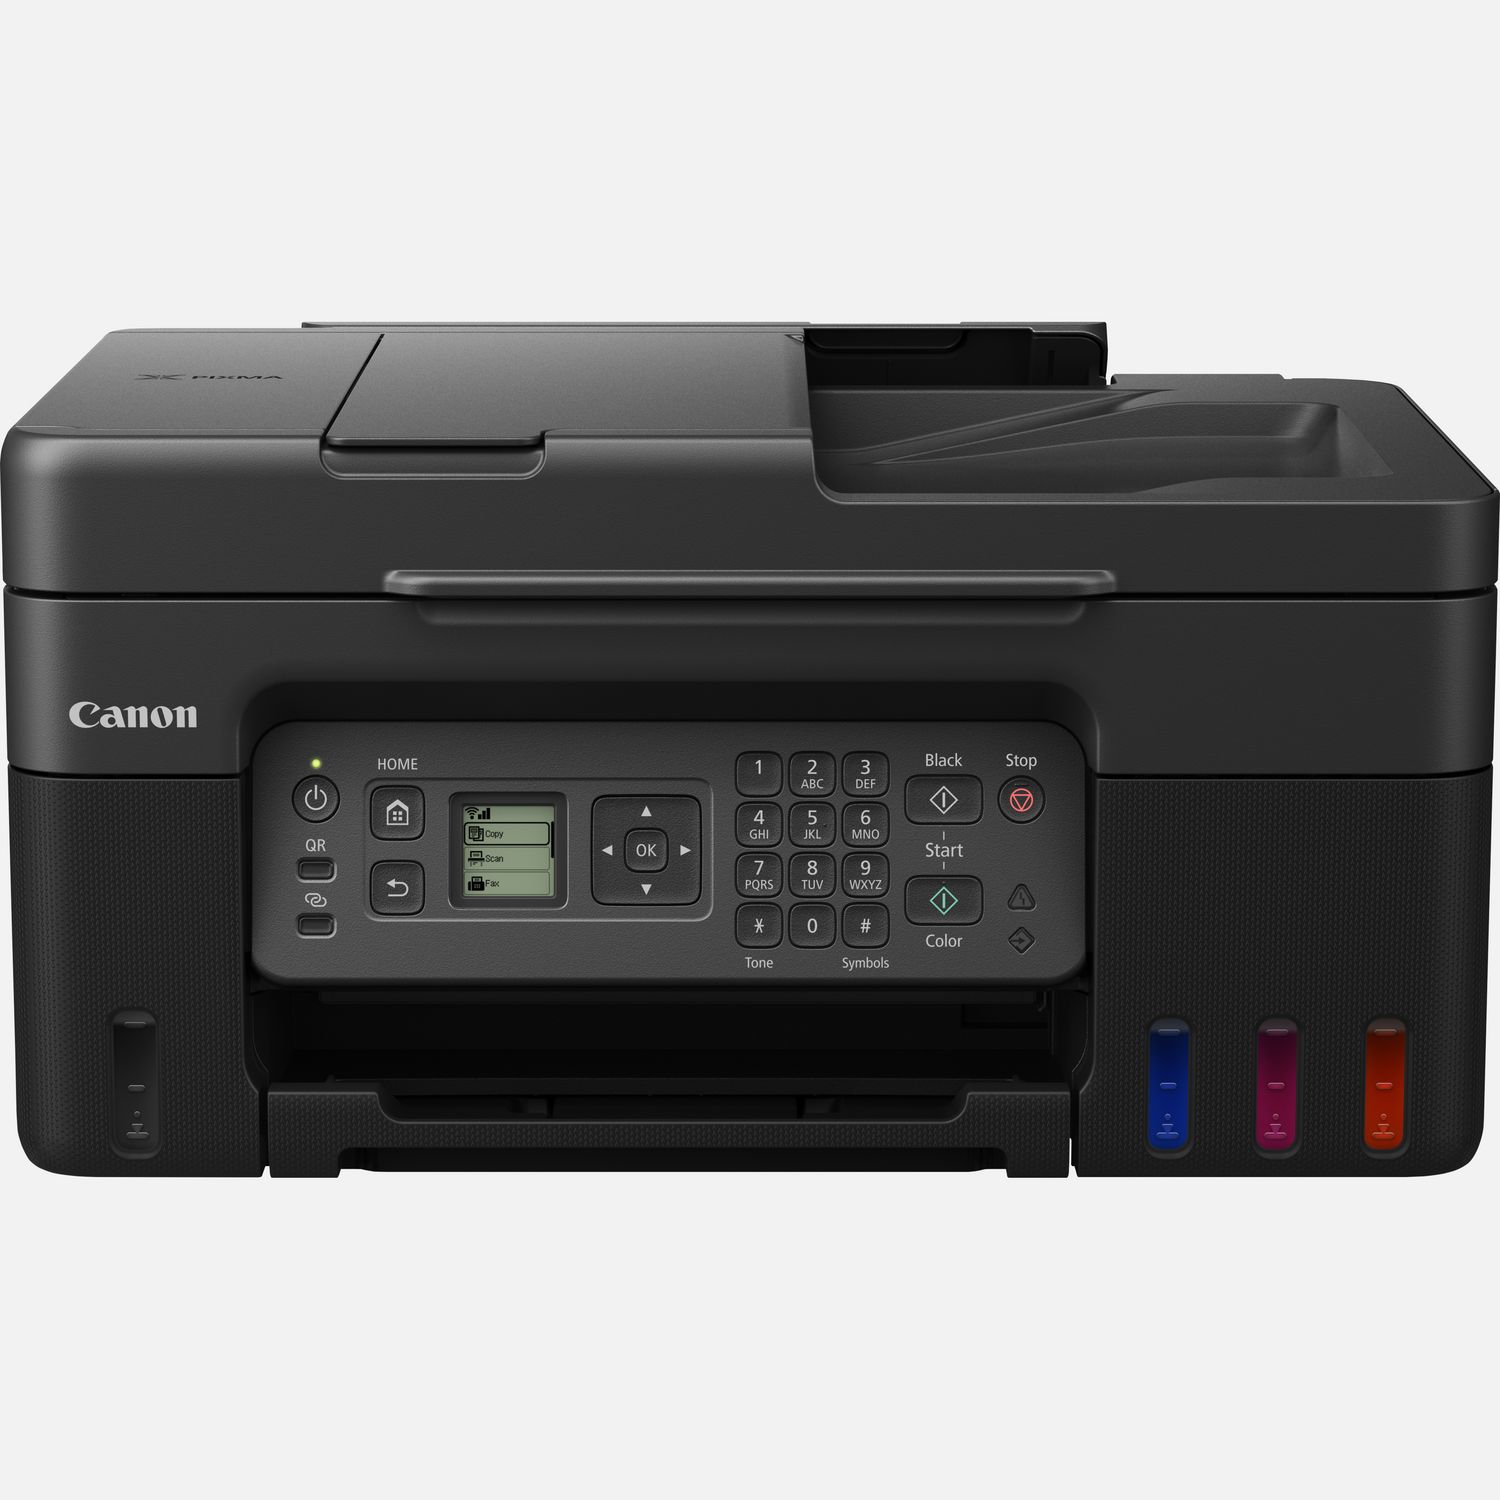 How to refill a Canon 560 Black ink cartridge like a professional